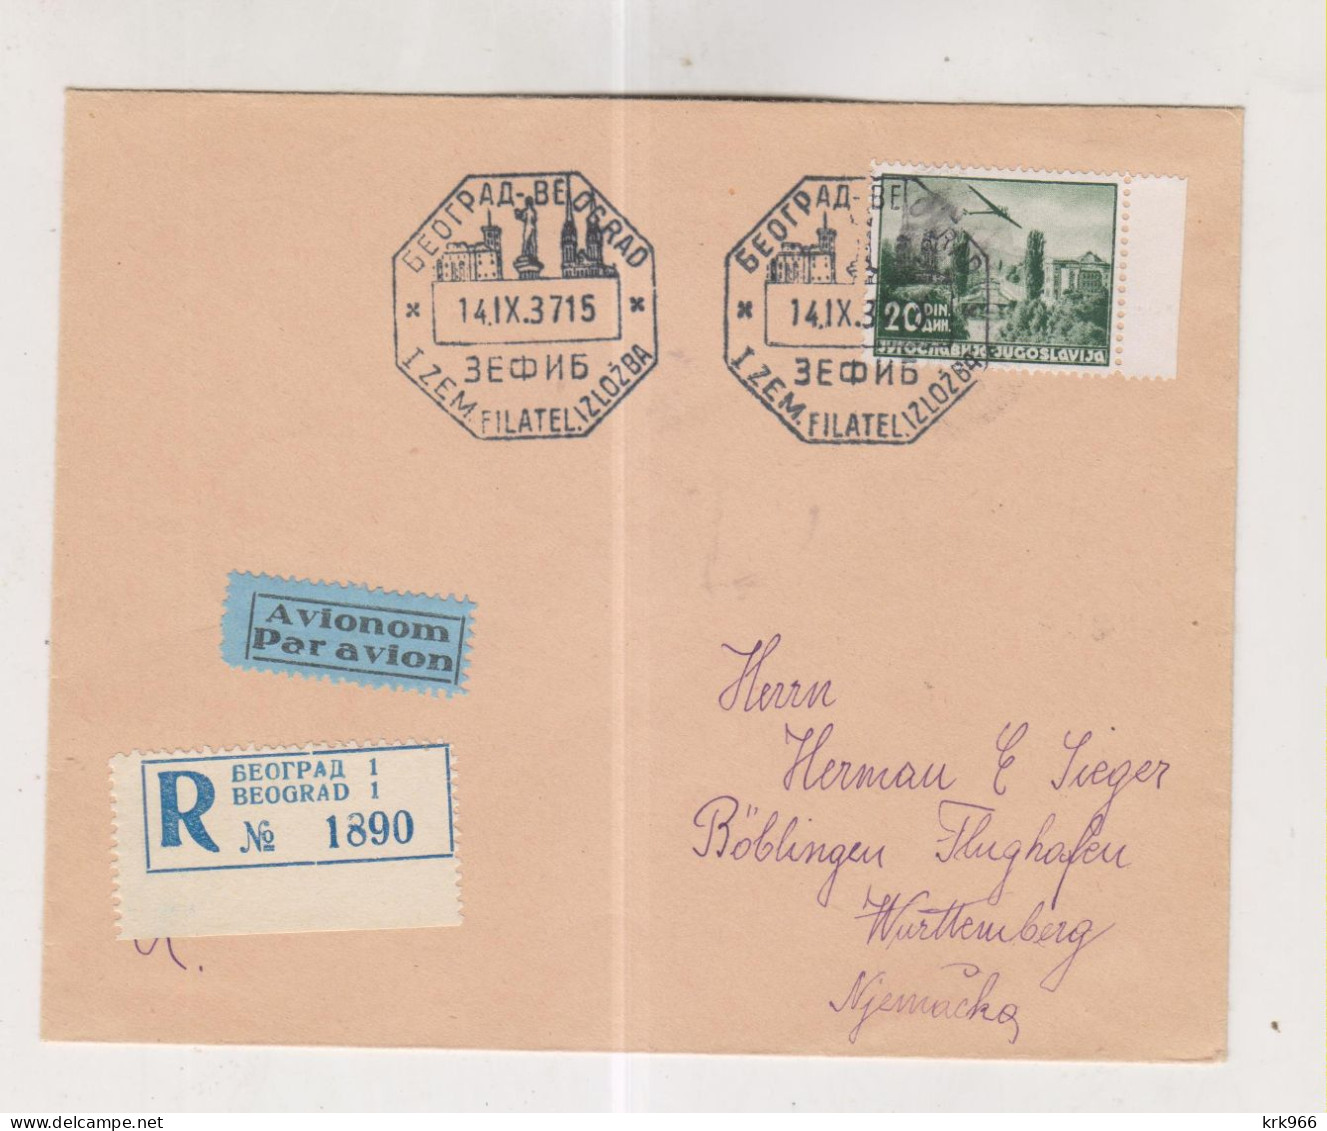 YUGOSLAVIA,1937 BEOGRAD ZEFIB Stamp Expo Nice Registered Airmail Cover To Germany - Covers & Documents